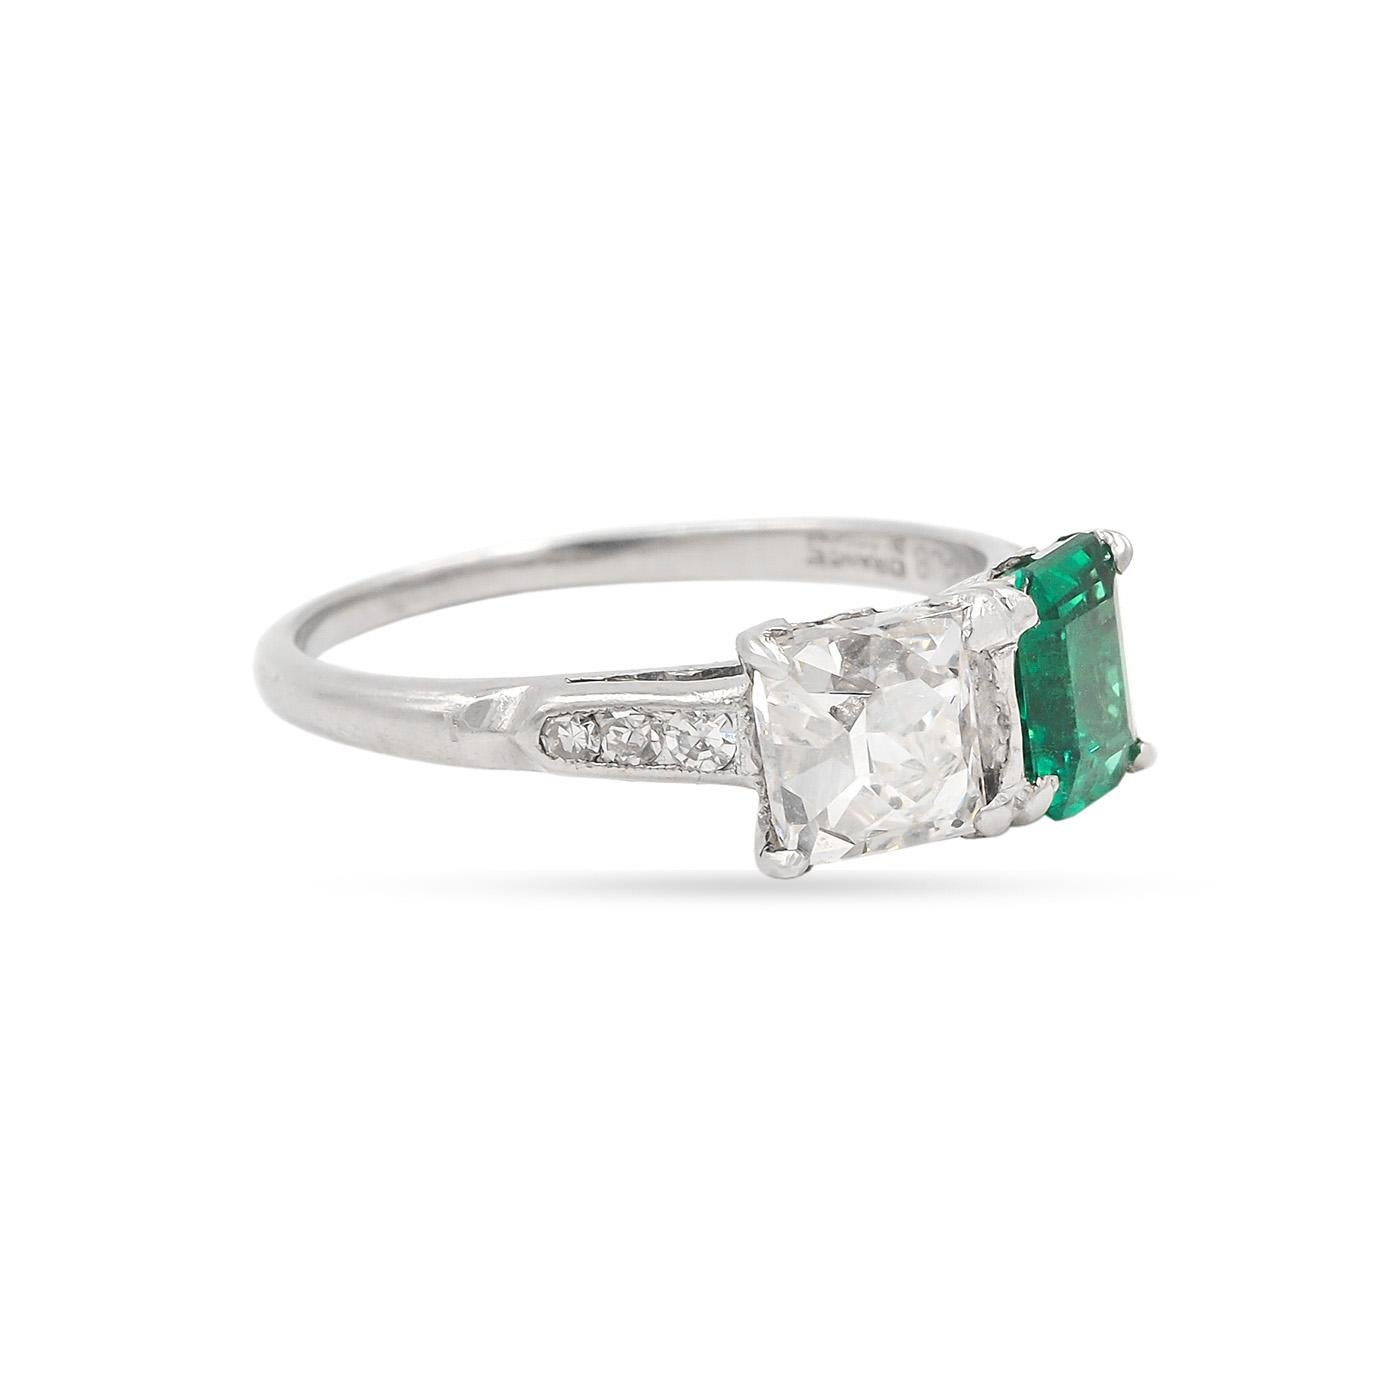 Original Art Deco era French Cut Diamond & Emerald Toi et Moi Engagement Ring composed of platinum. The French Cut diamond is 1.51 carats, GIA certified H color/SI2 clarity. The AGL certified Emerald Cut Natural Colombian Emerald is 1.02 carats.